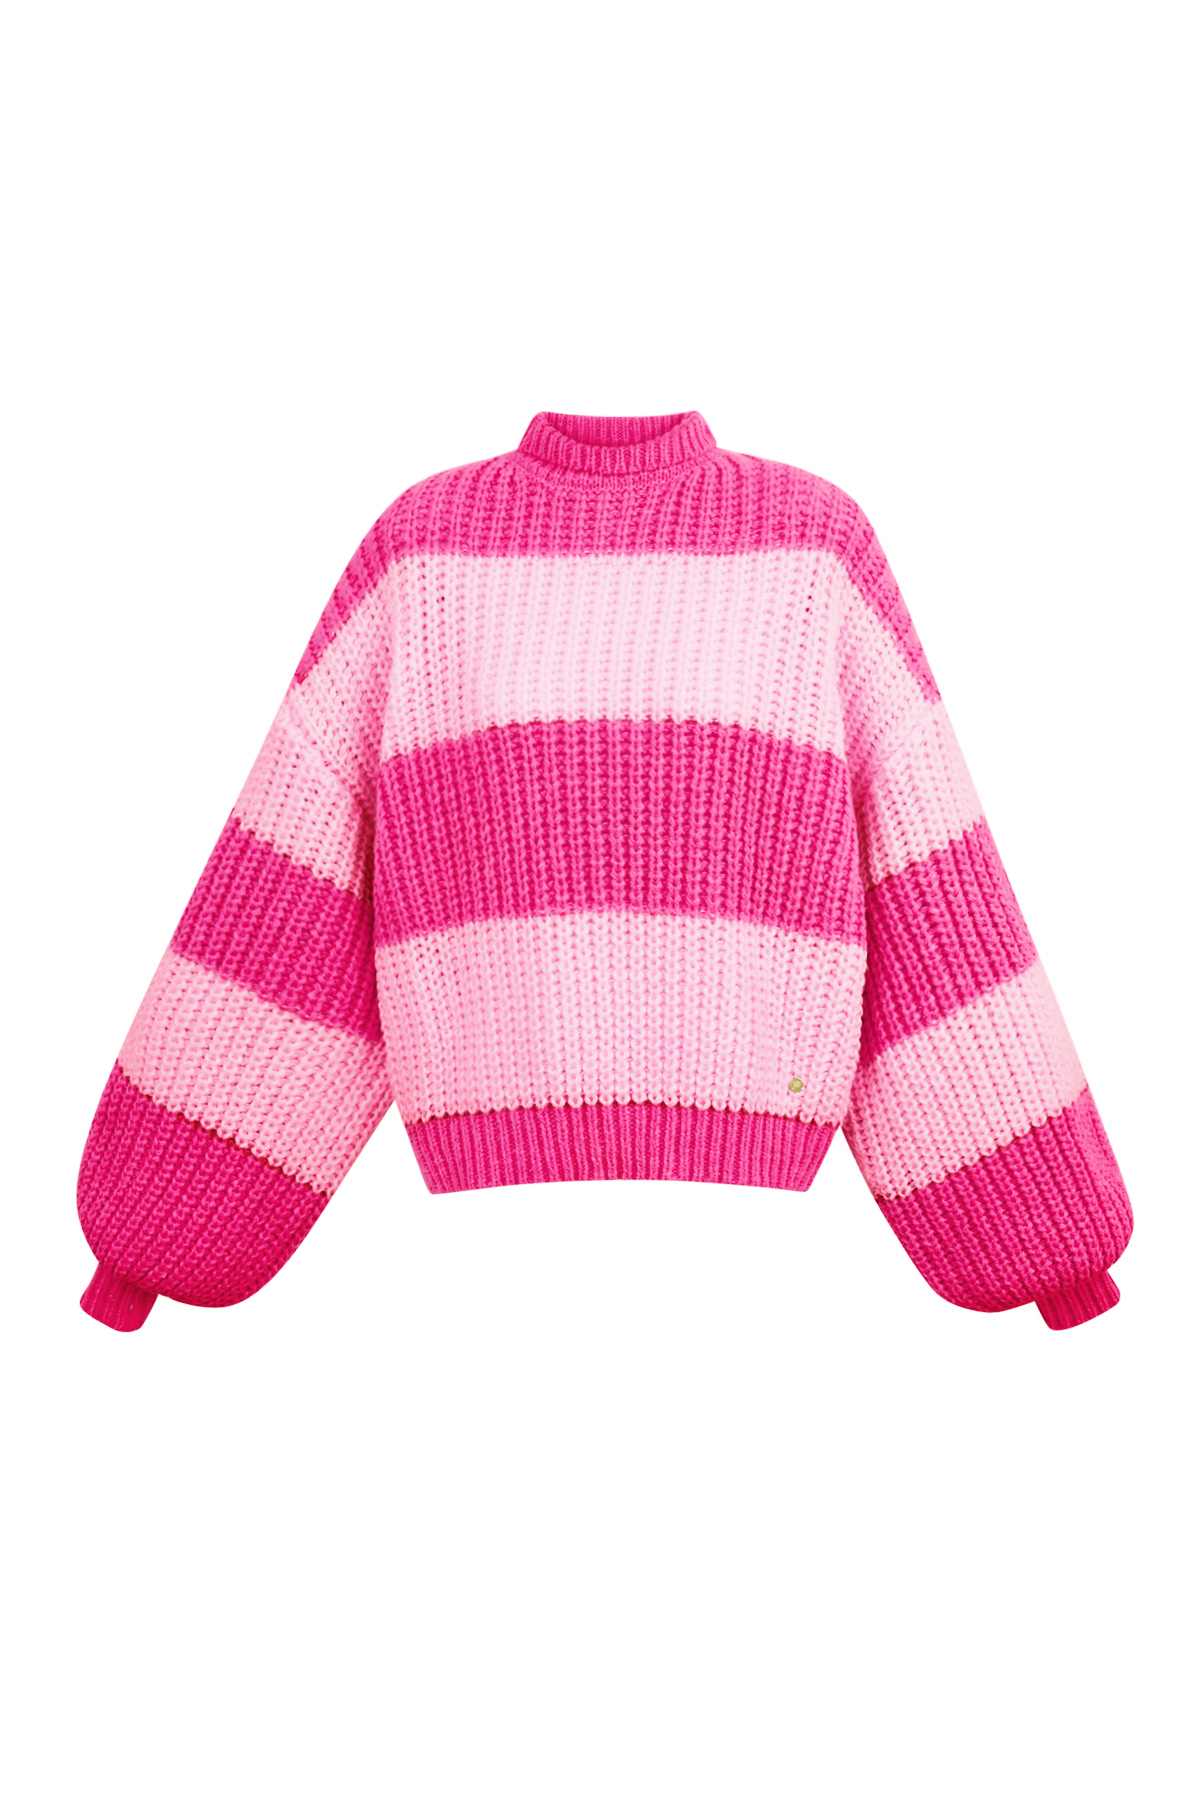 Warm knitted striped sweater - pink